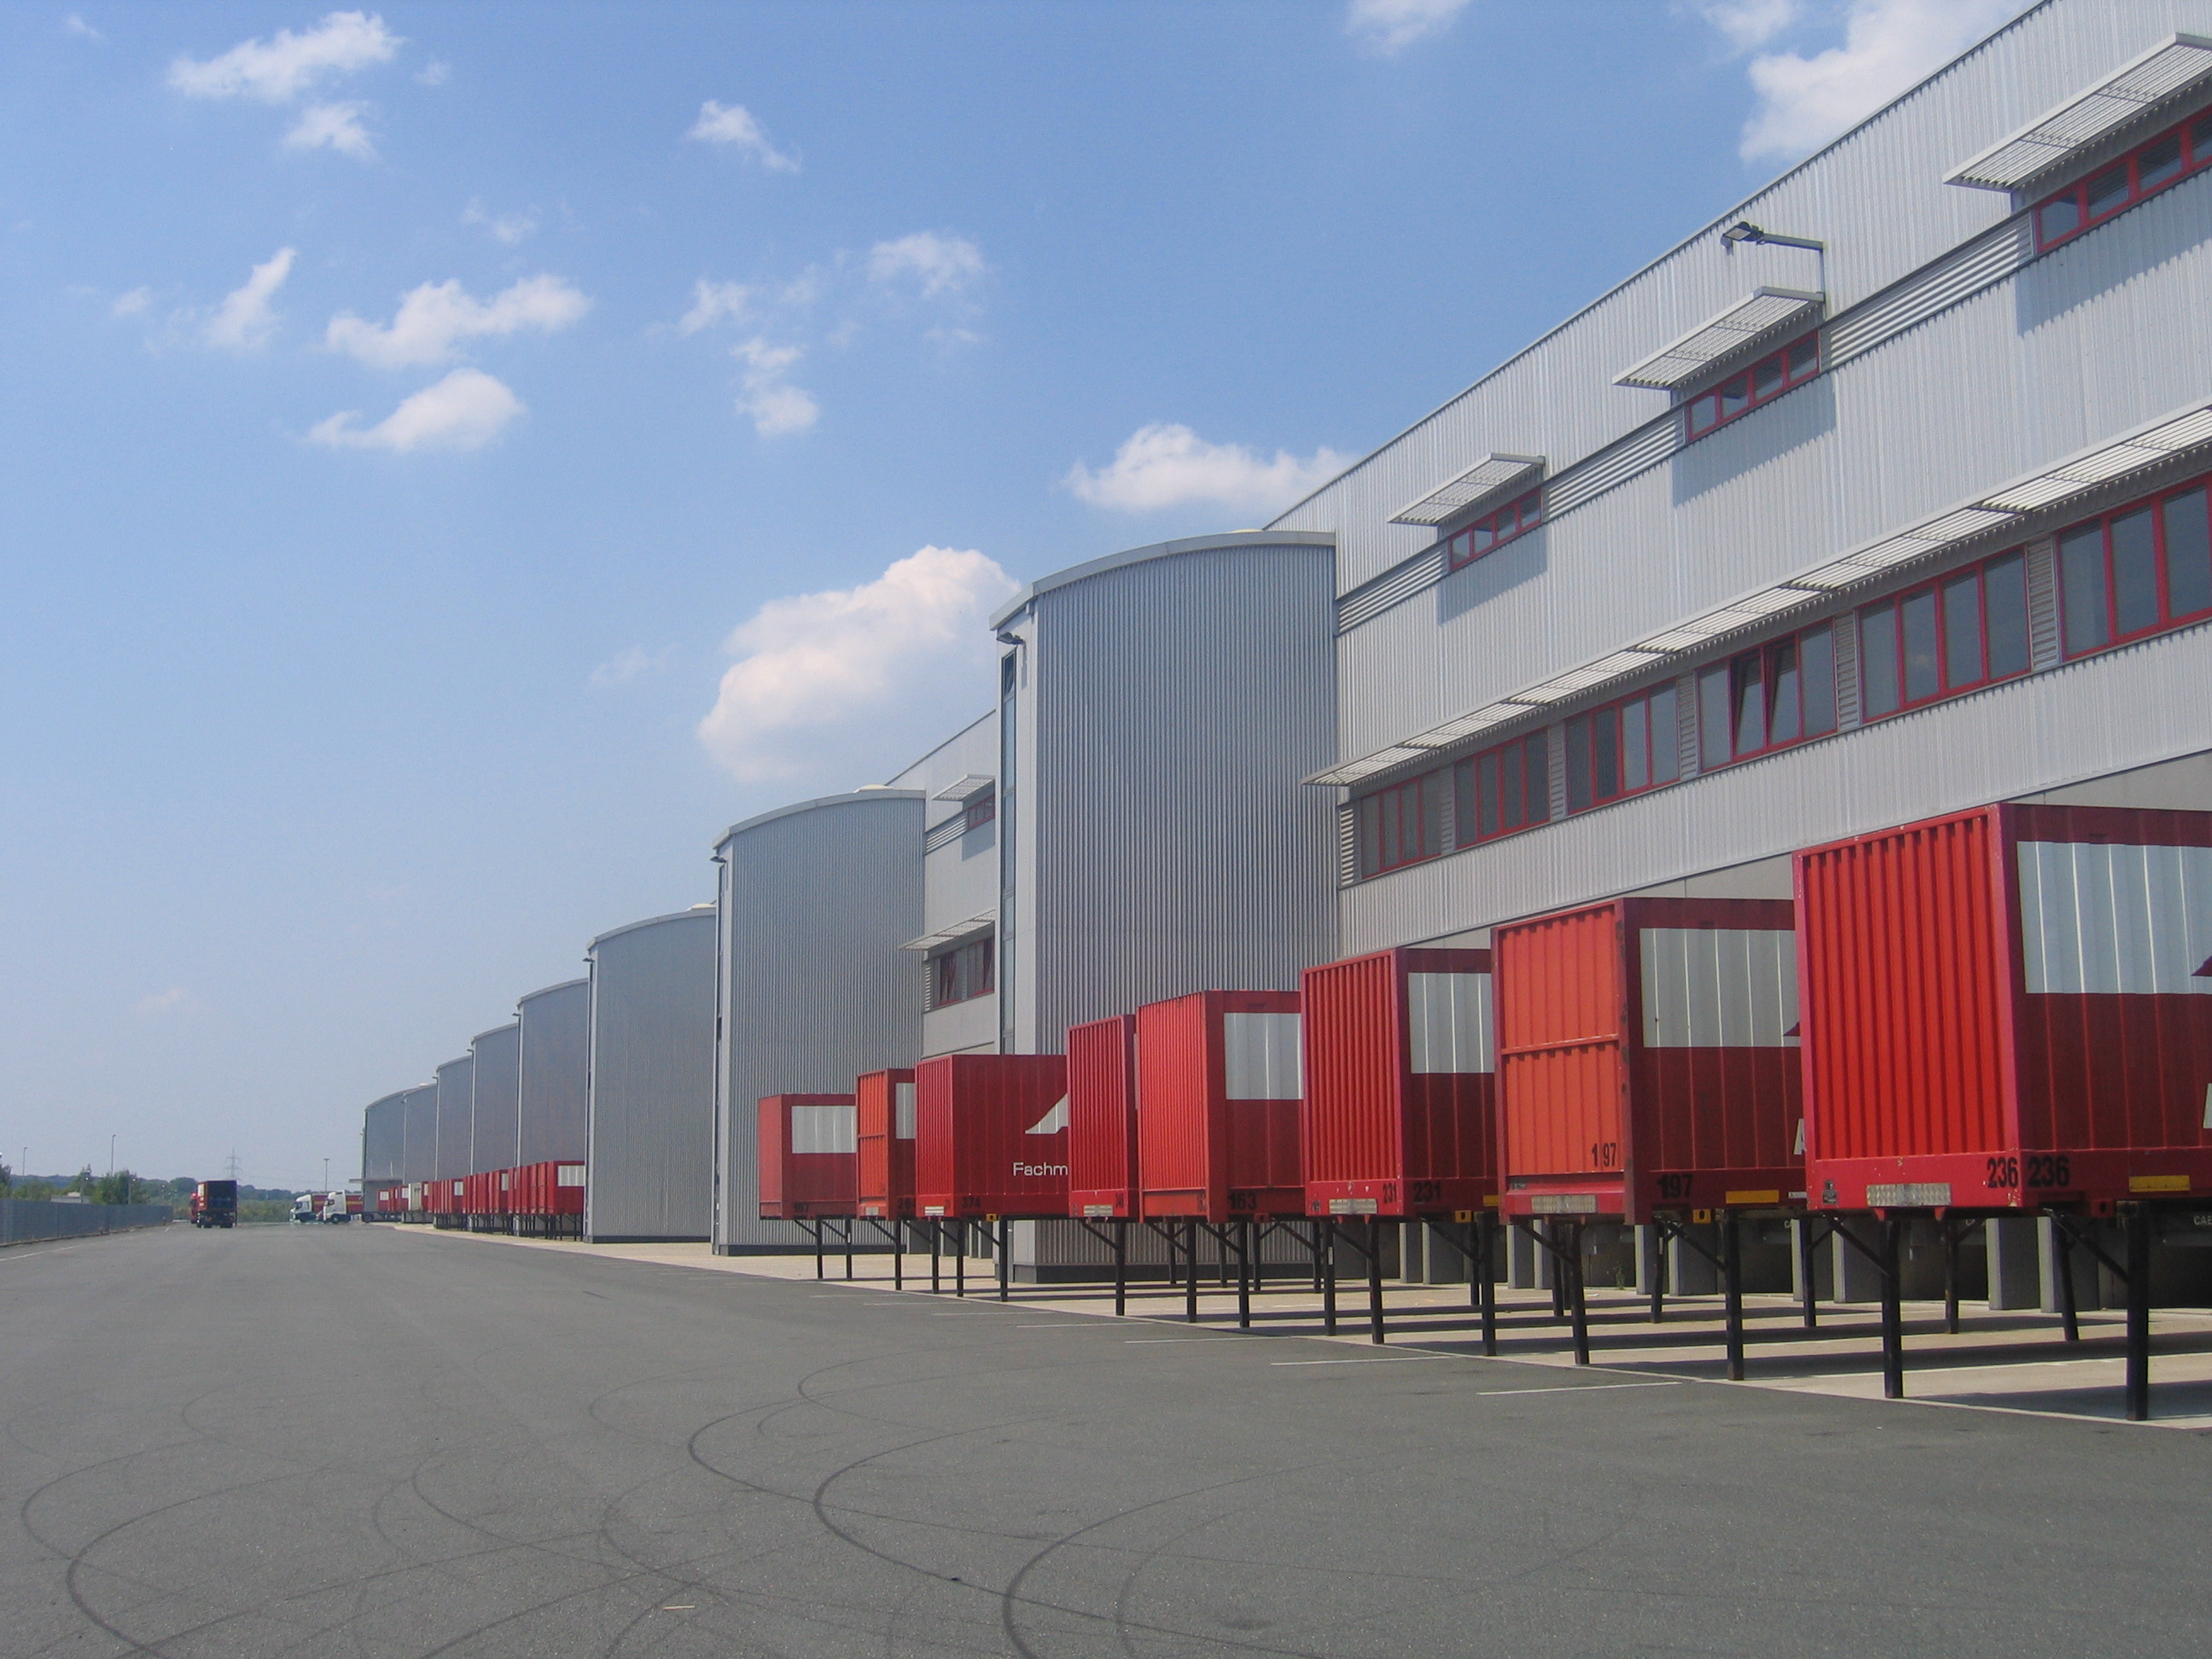 Exterior of warehouse viewing the red loading bays